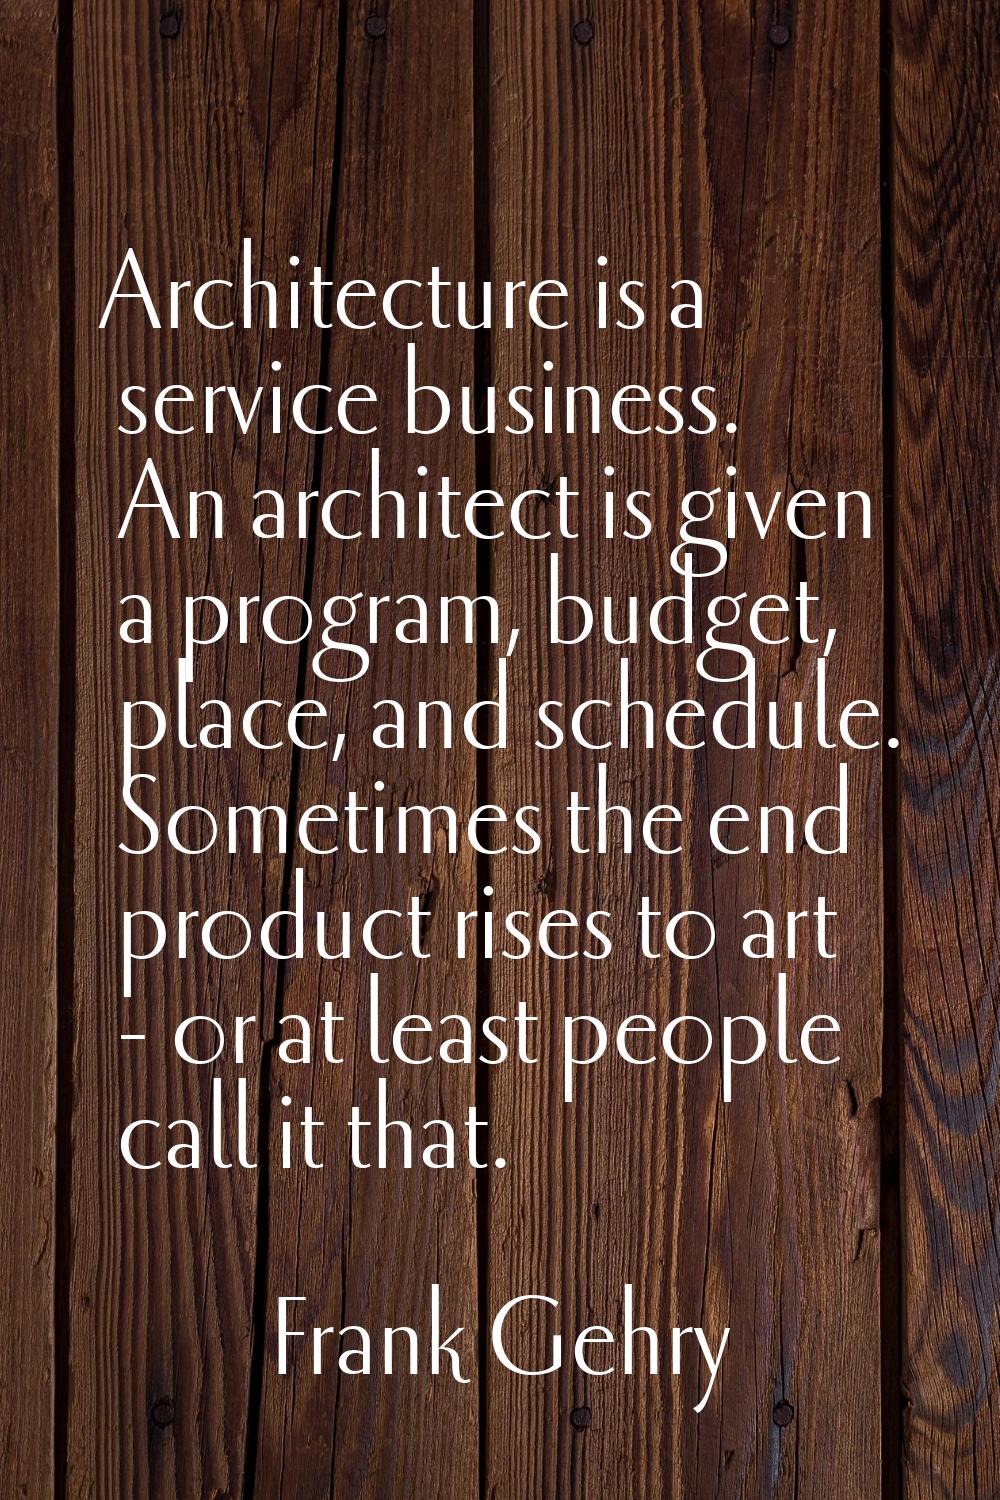 Architecture is a service business. An architect is given a program, budget, place, and schedule. S